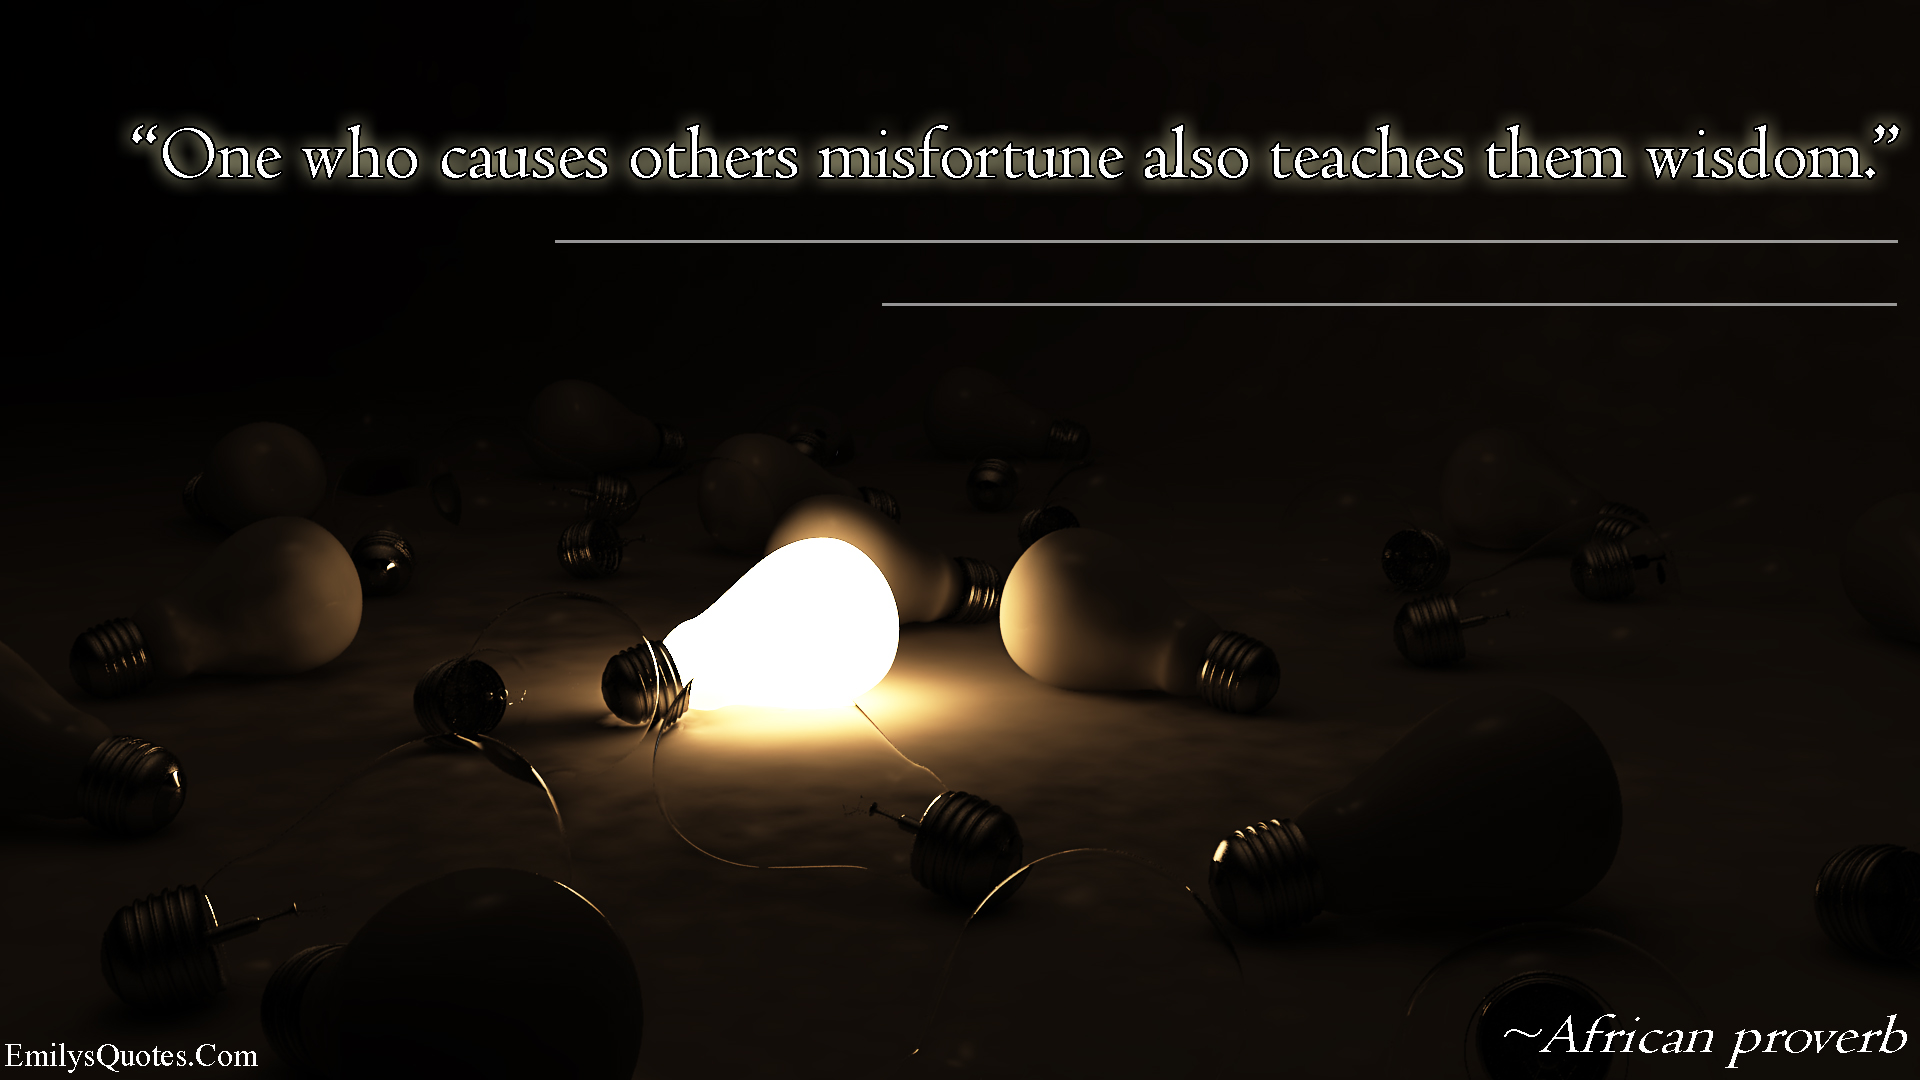 One who causes others misfortune also teaches them wisdom